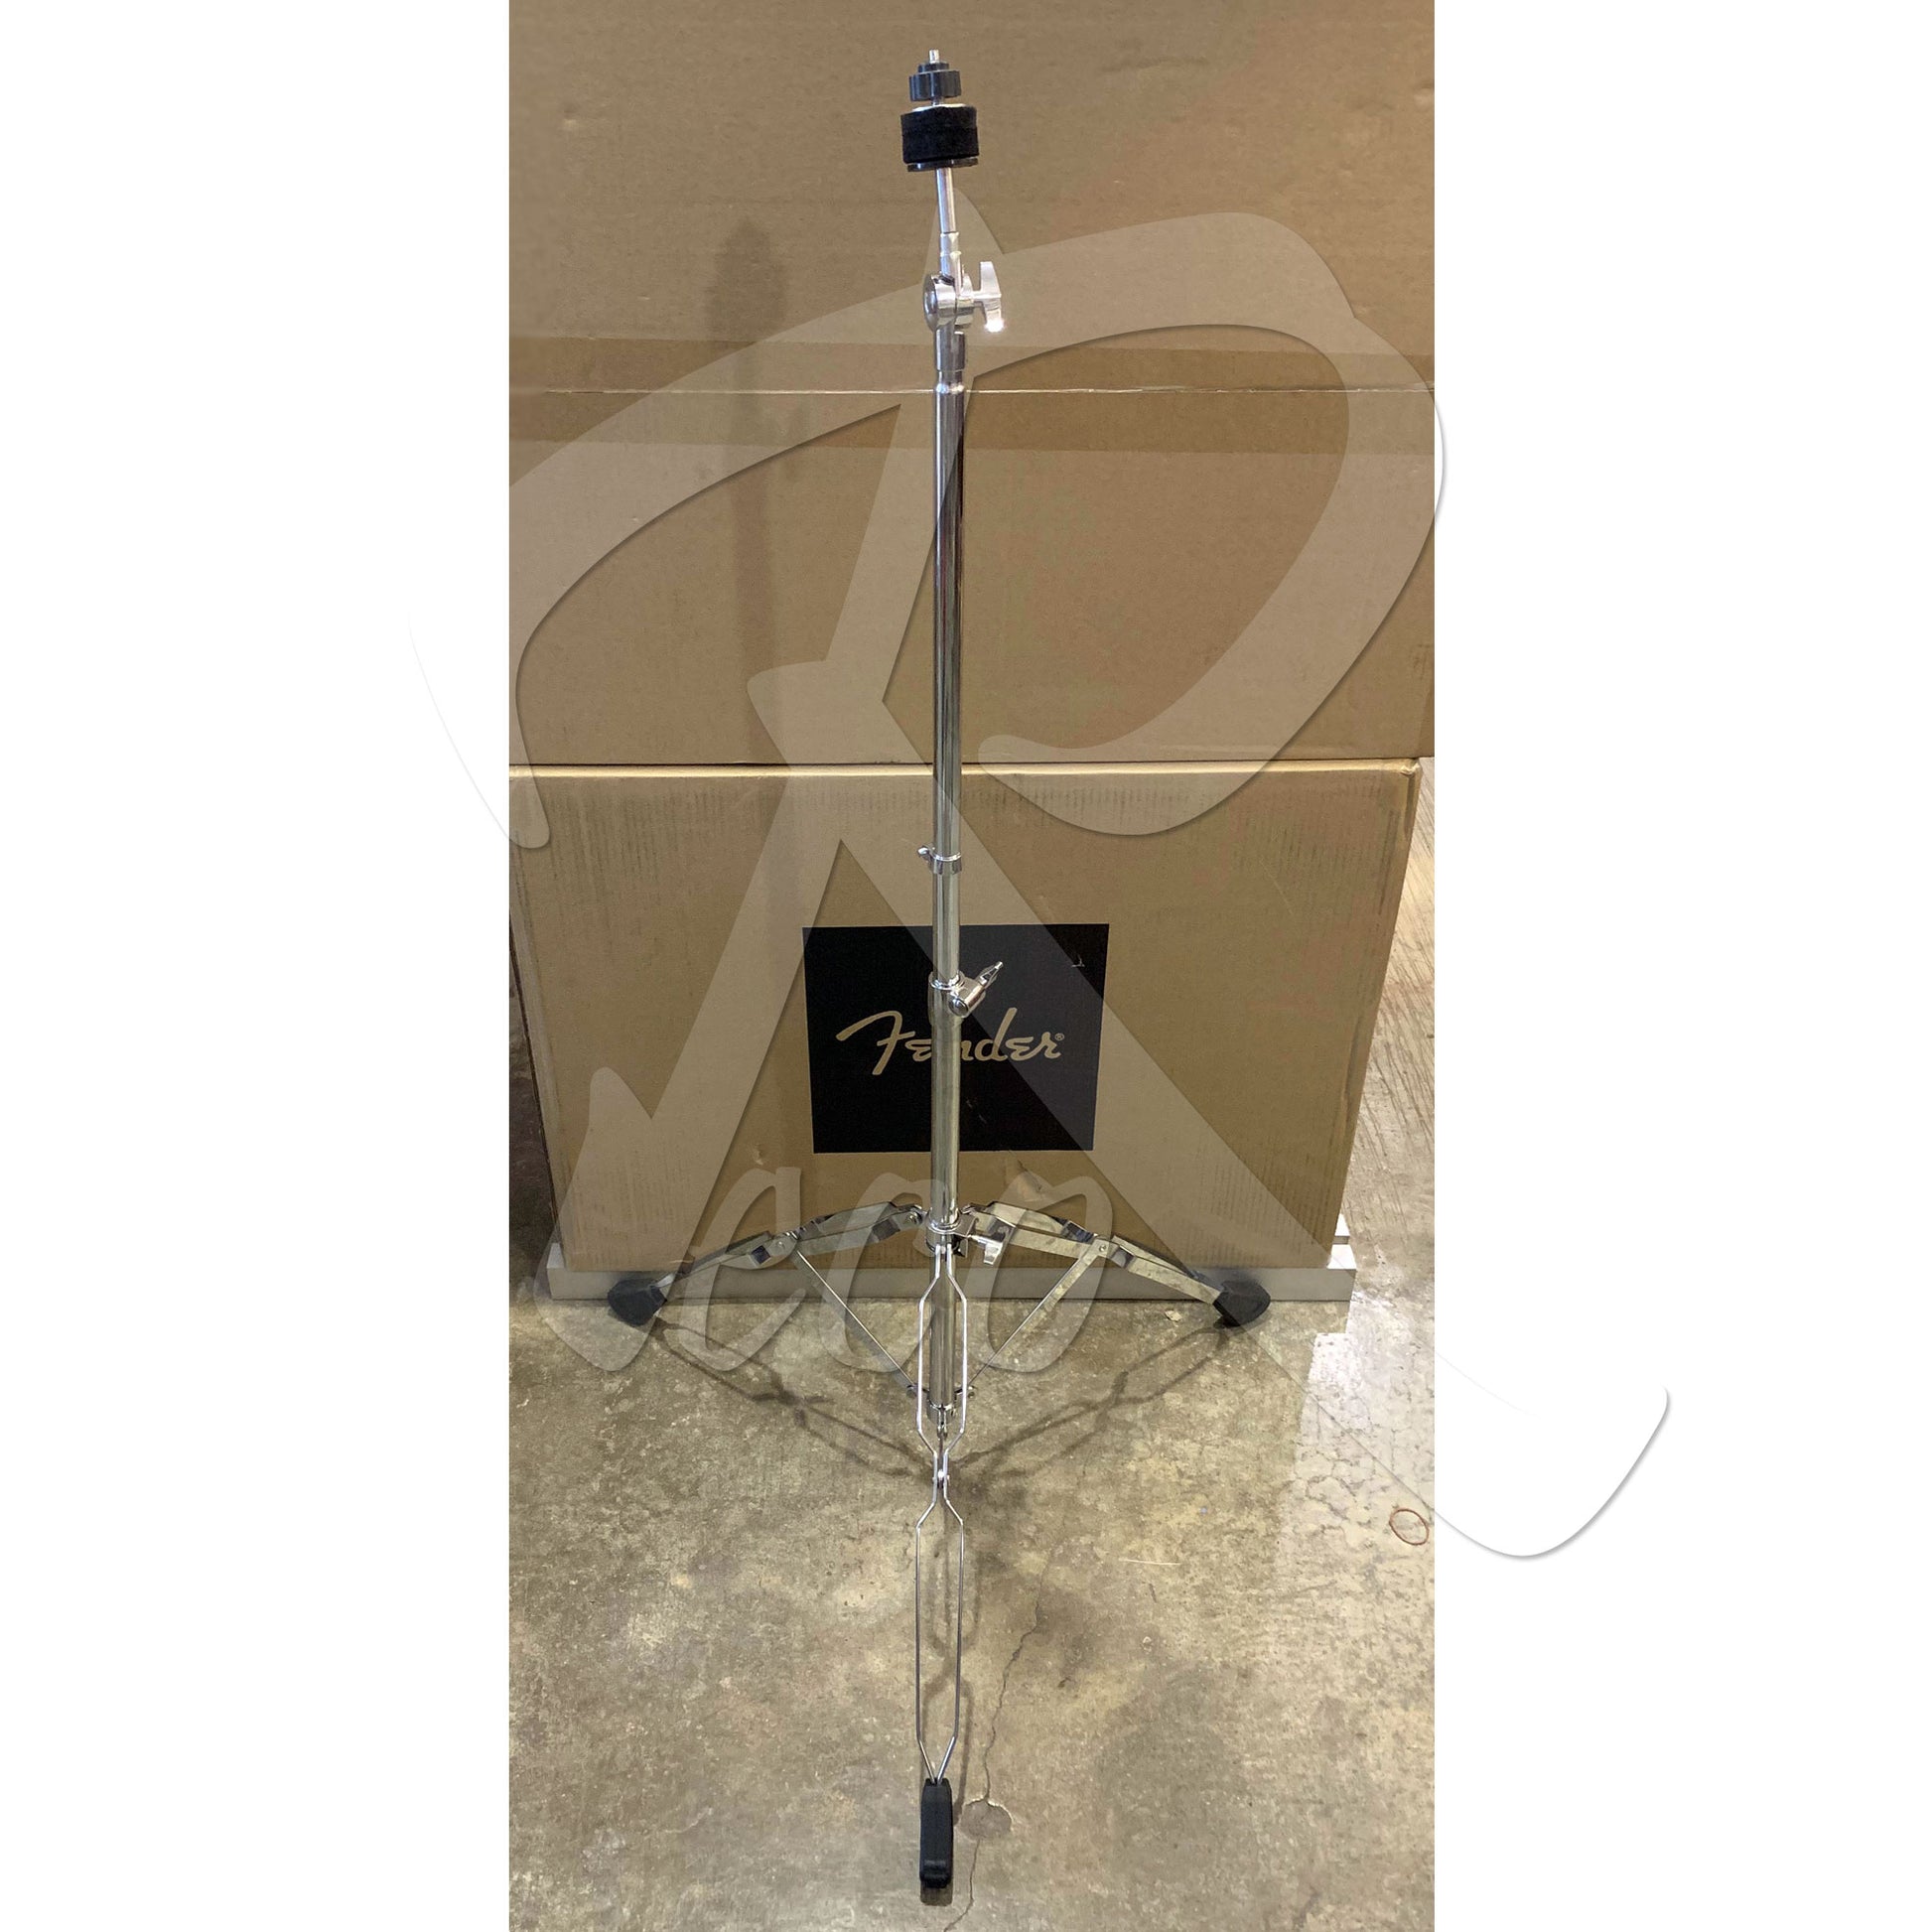 RM SS200 Double Braced Solid Drum Cymbal Straight Stand - Reco Music Malaysia